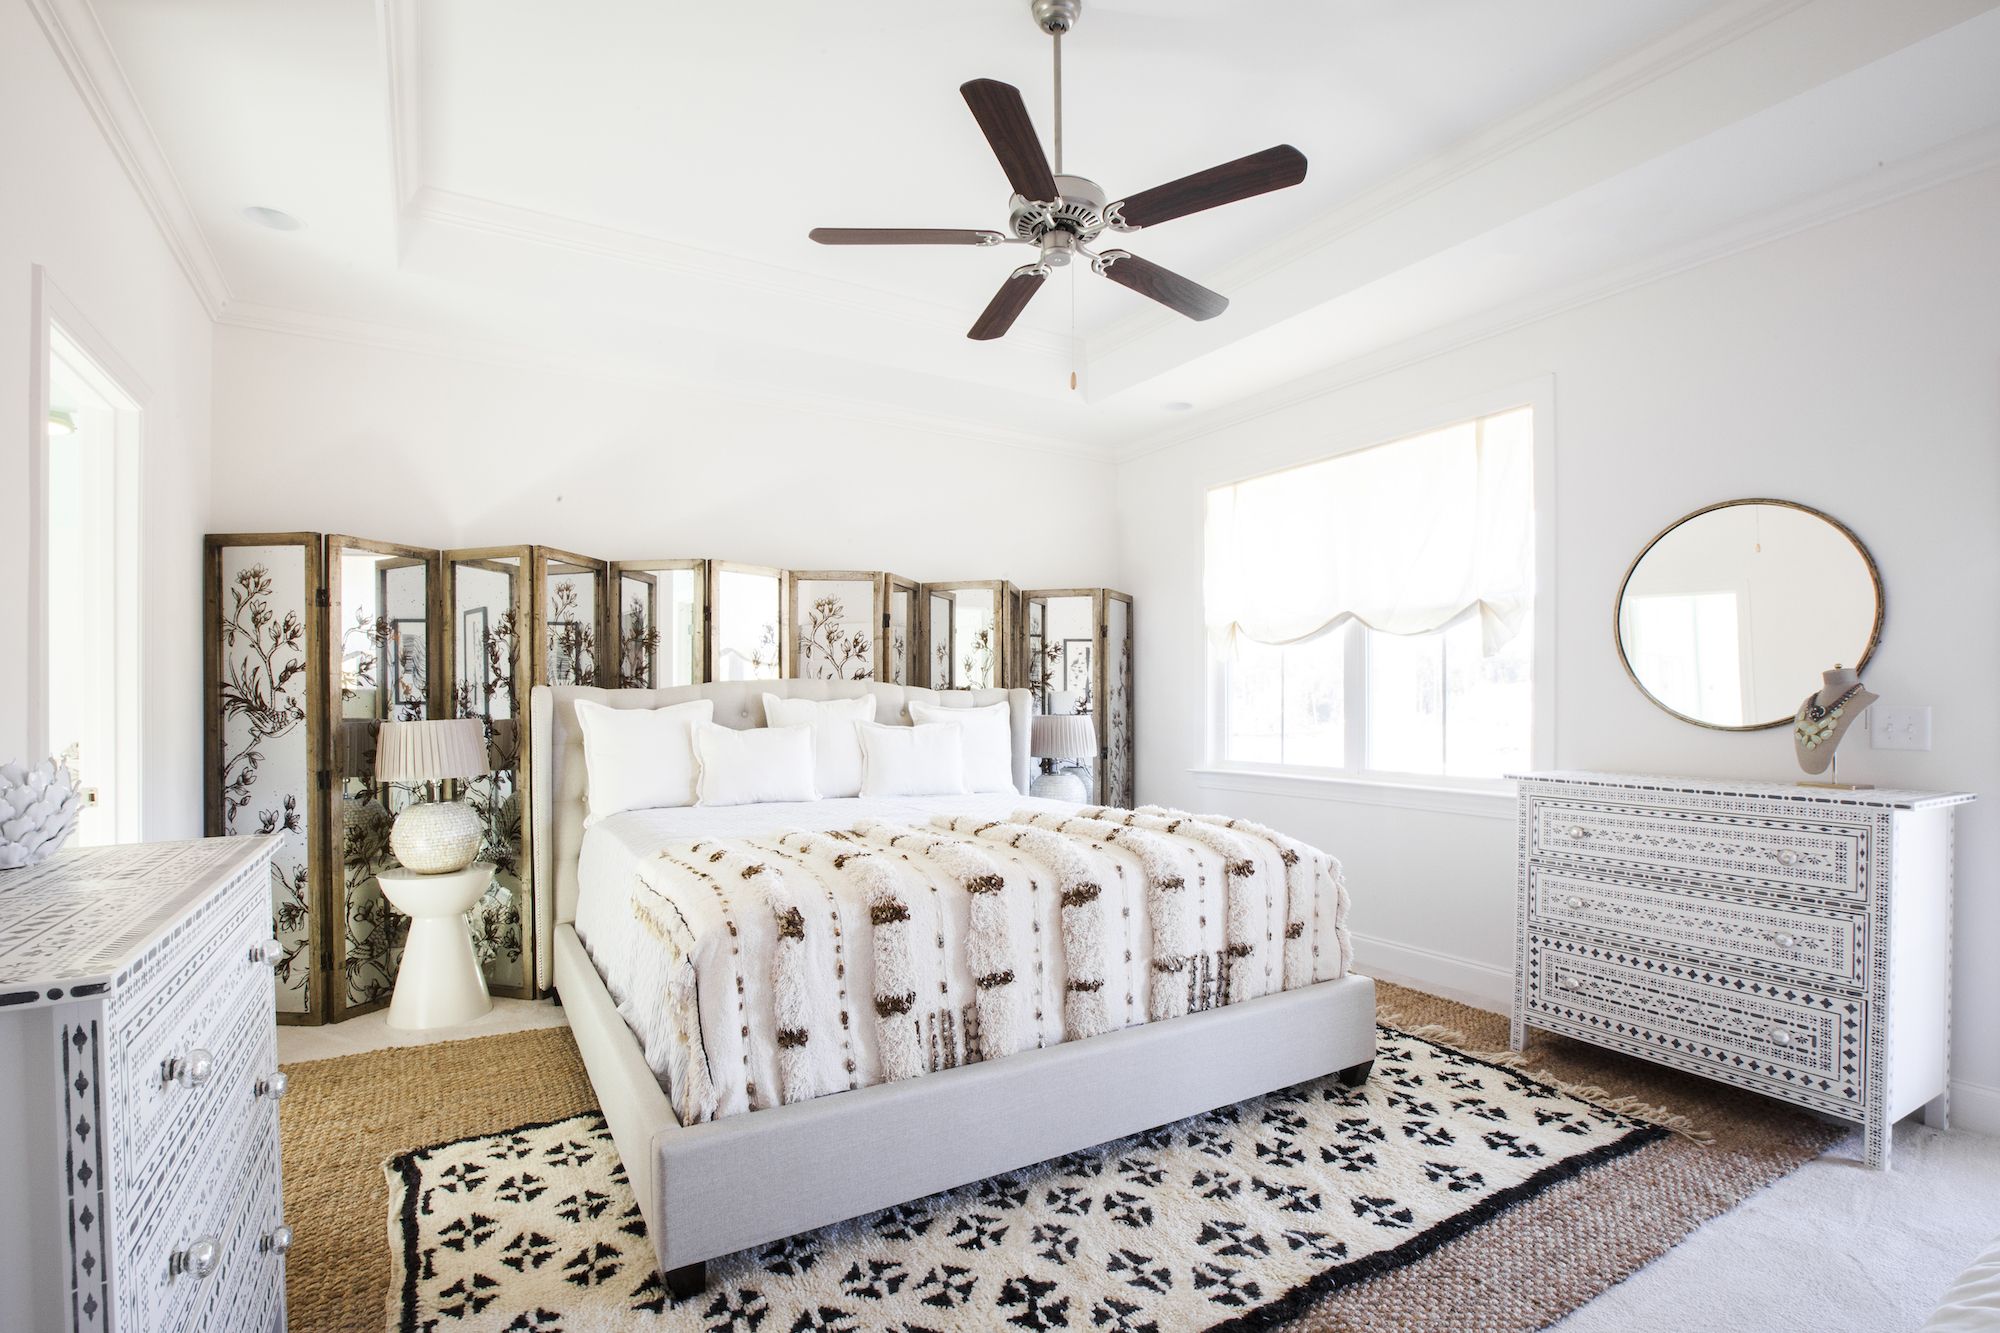 Decorating Your Home with a White Palette - Bedroom